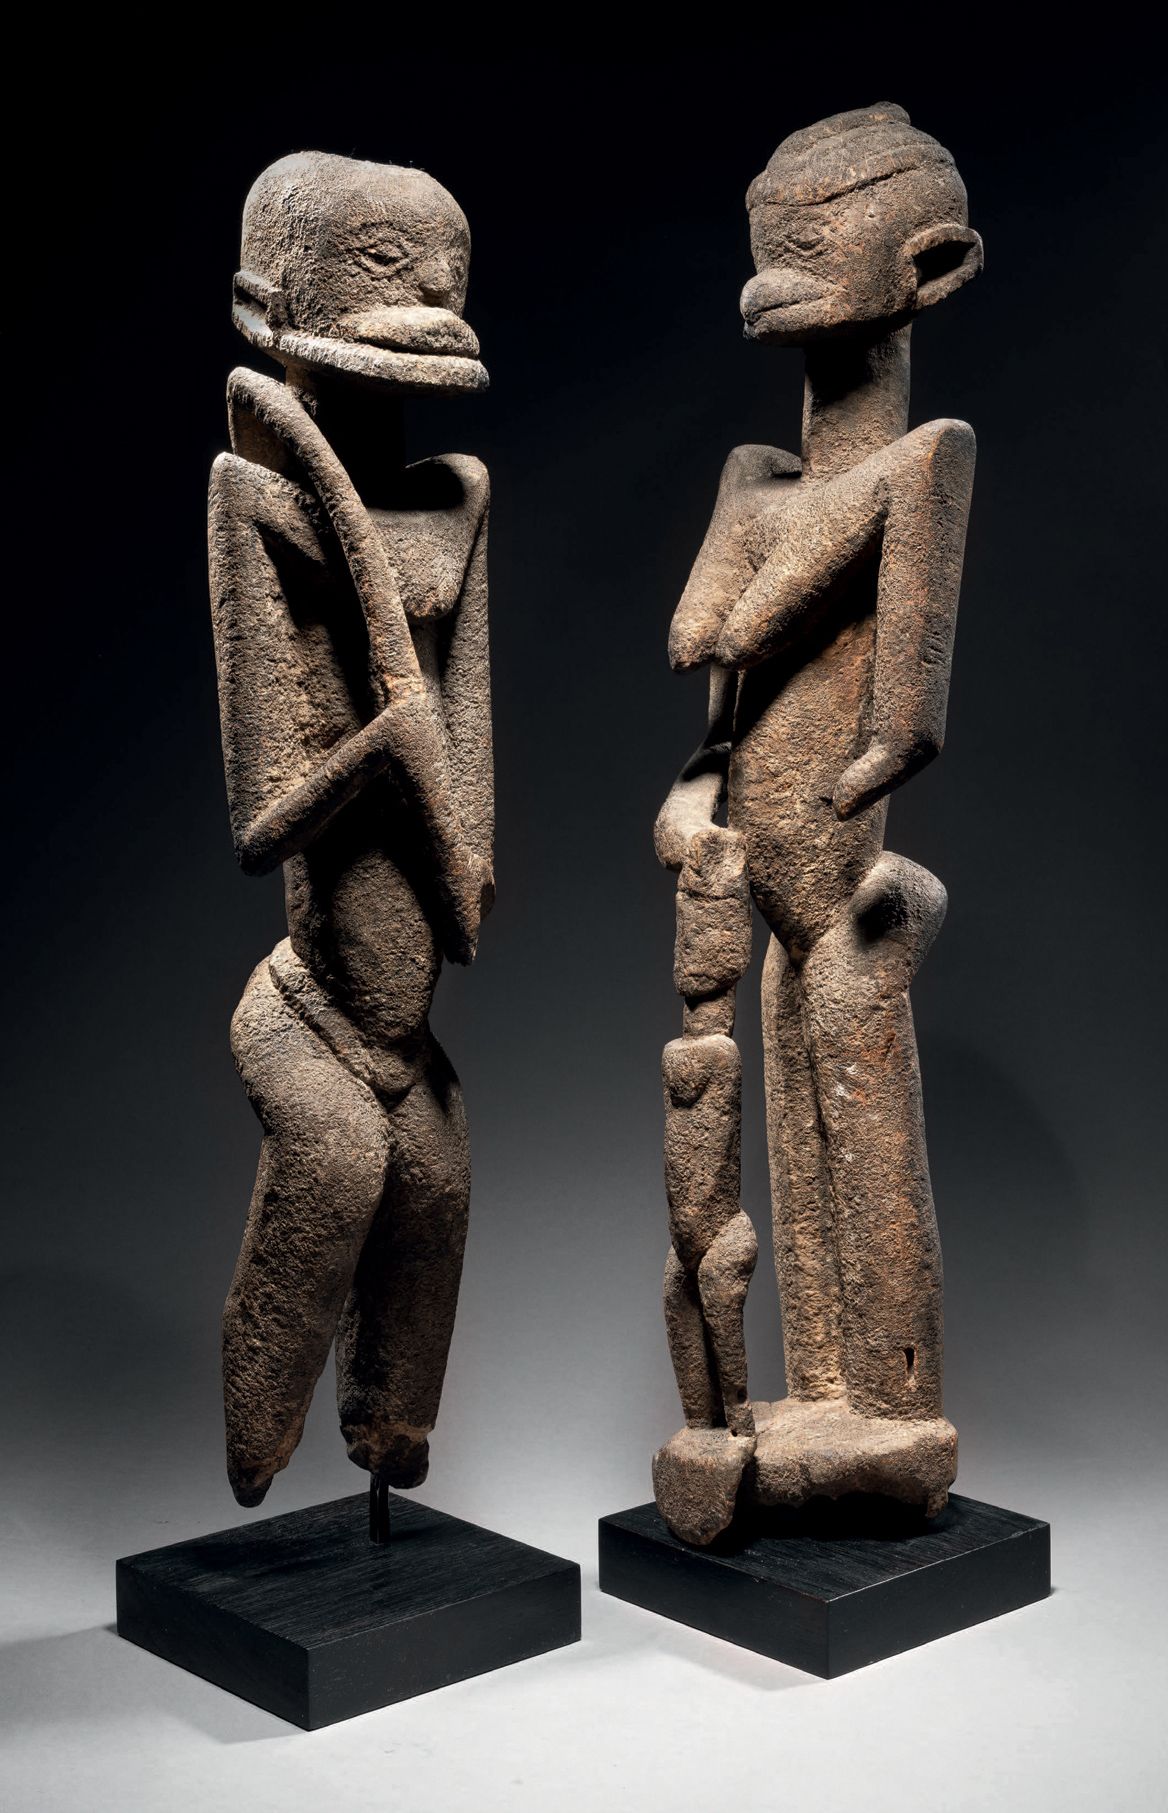 Null Ɵ Tellem pair of standing figures, Dogon, Mali 1335-1455
Wood with slightly&hellip;